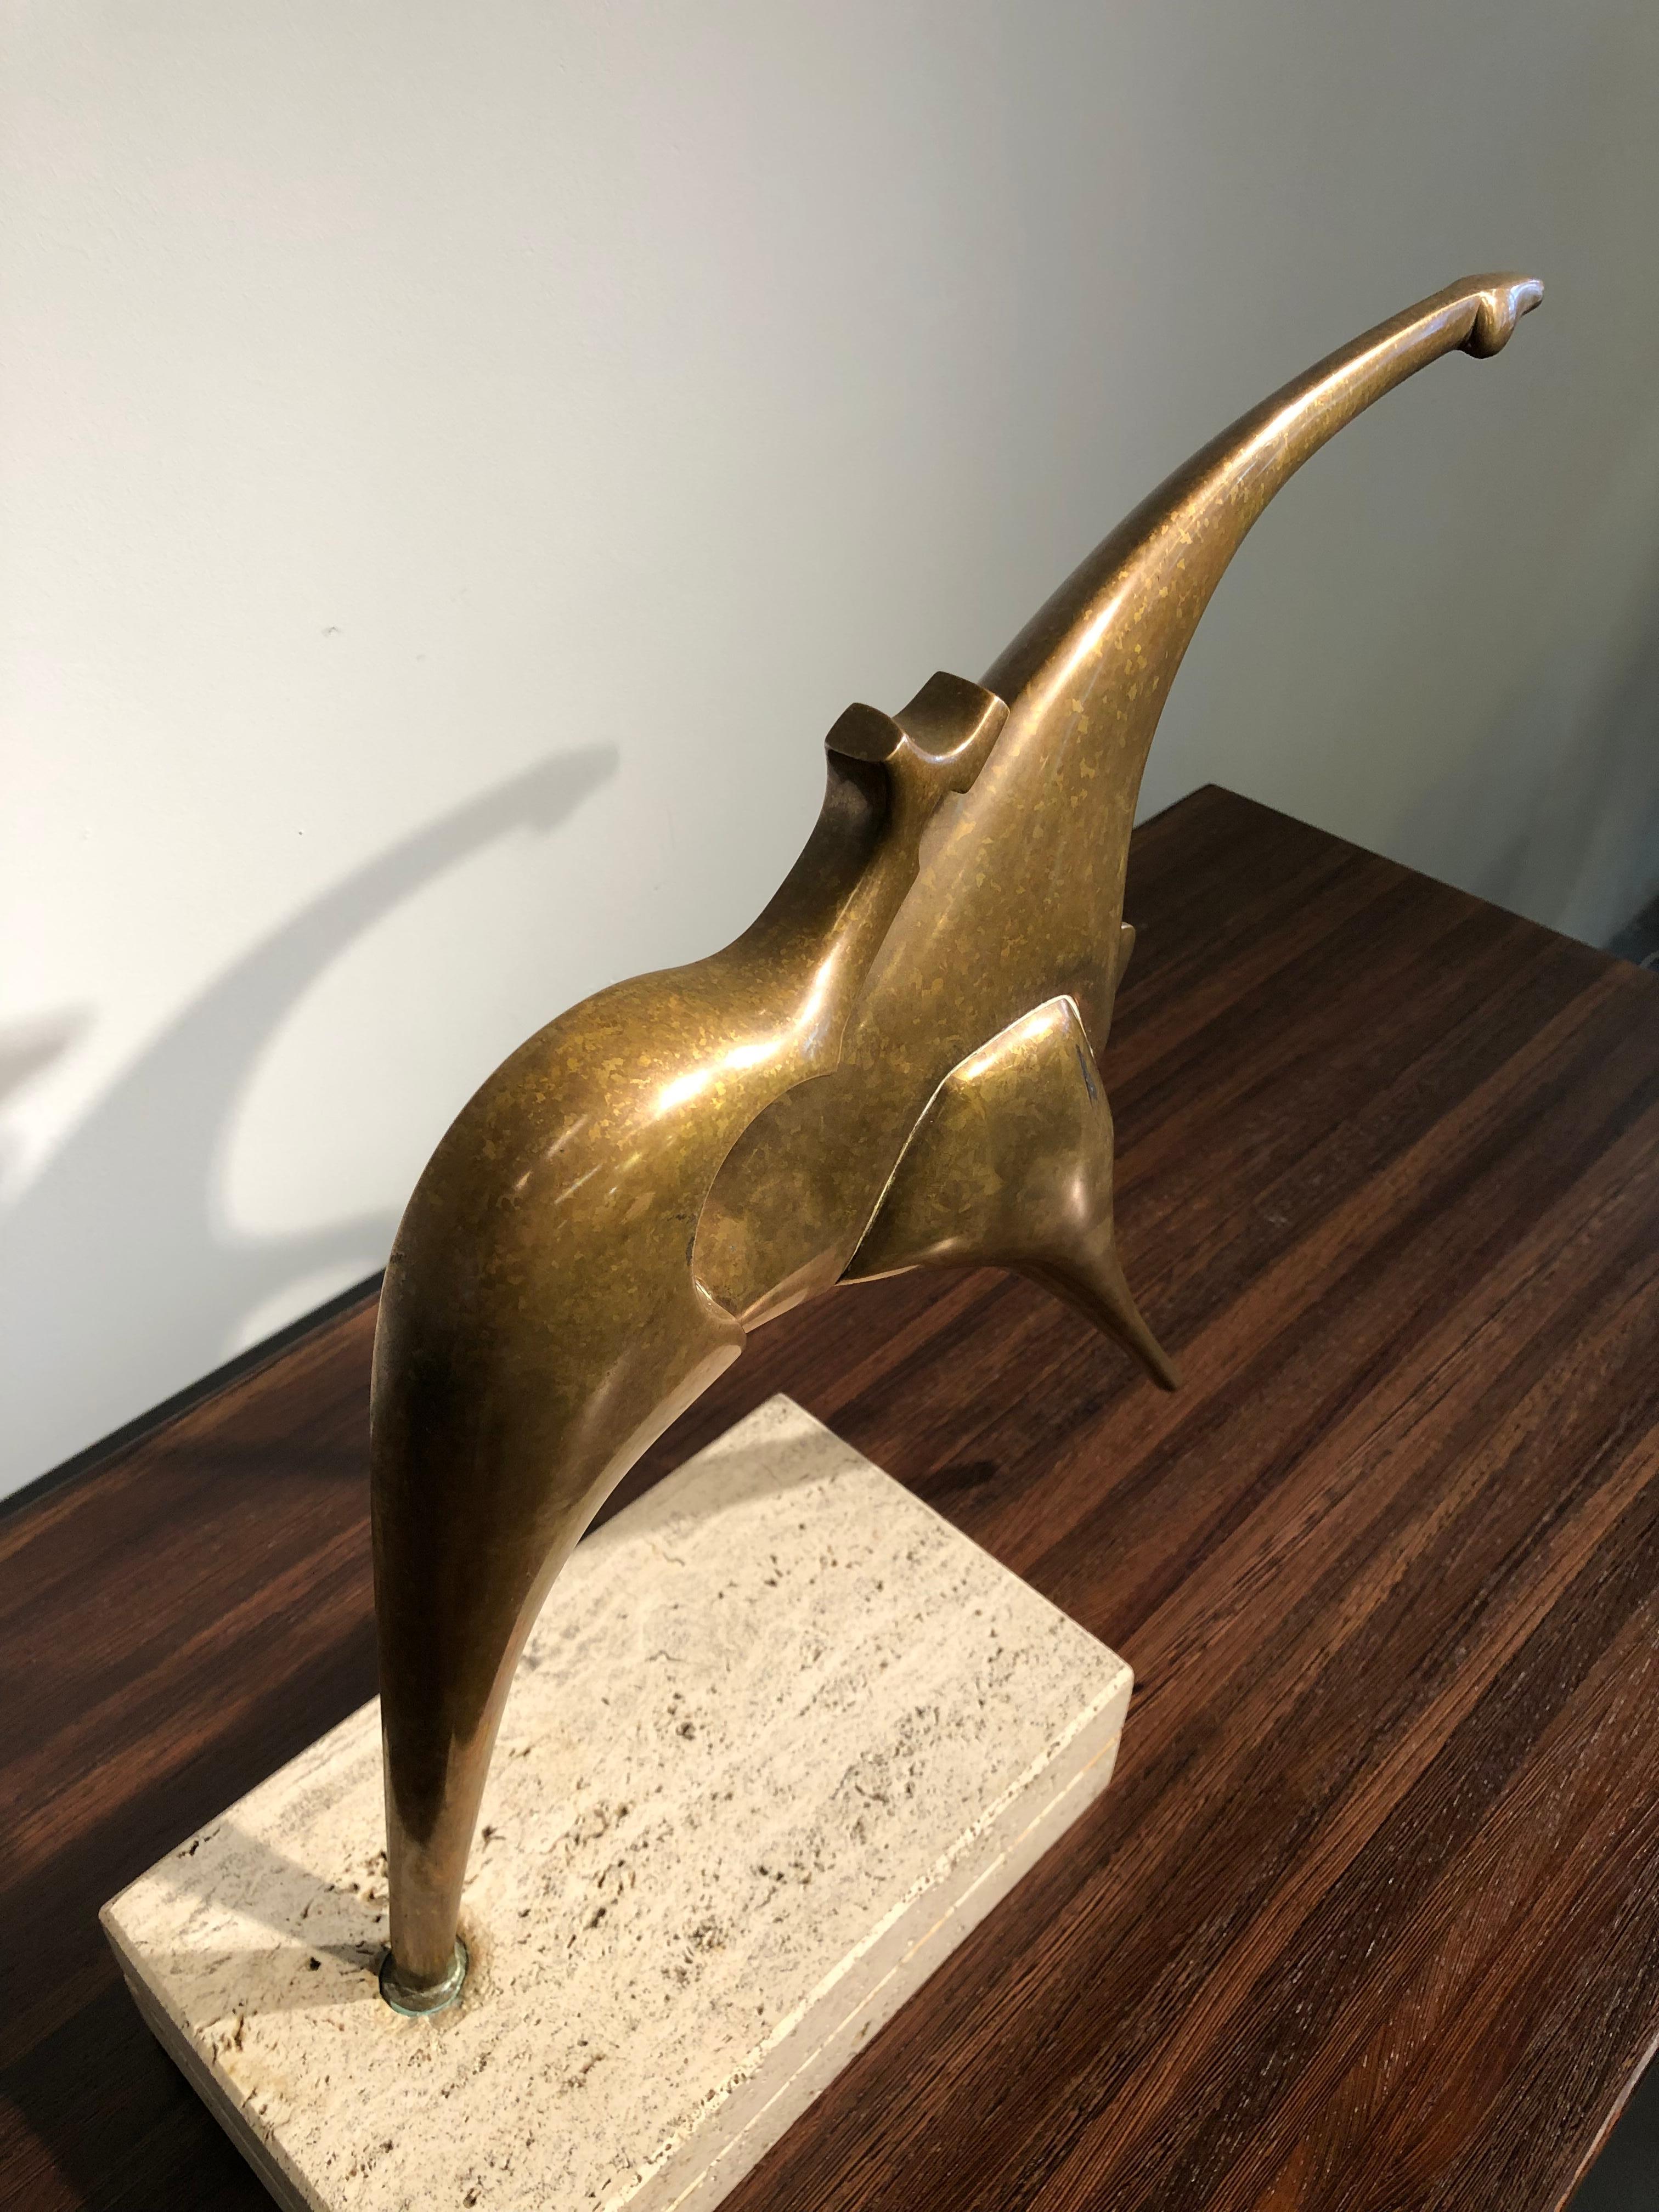 Cast Bronze Sculpture “Amazon” by Nikos Kessanlis from the seventies 